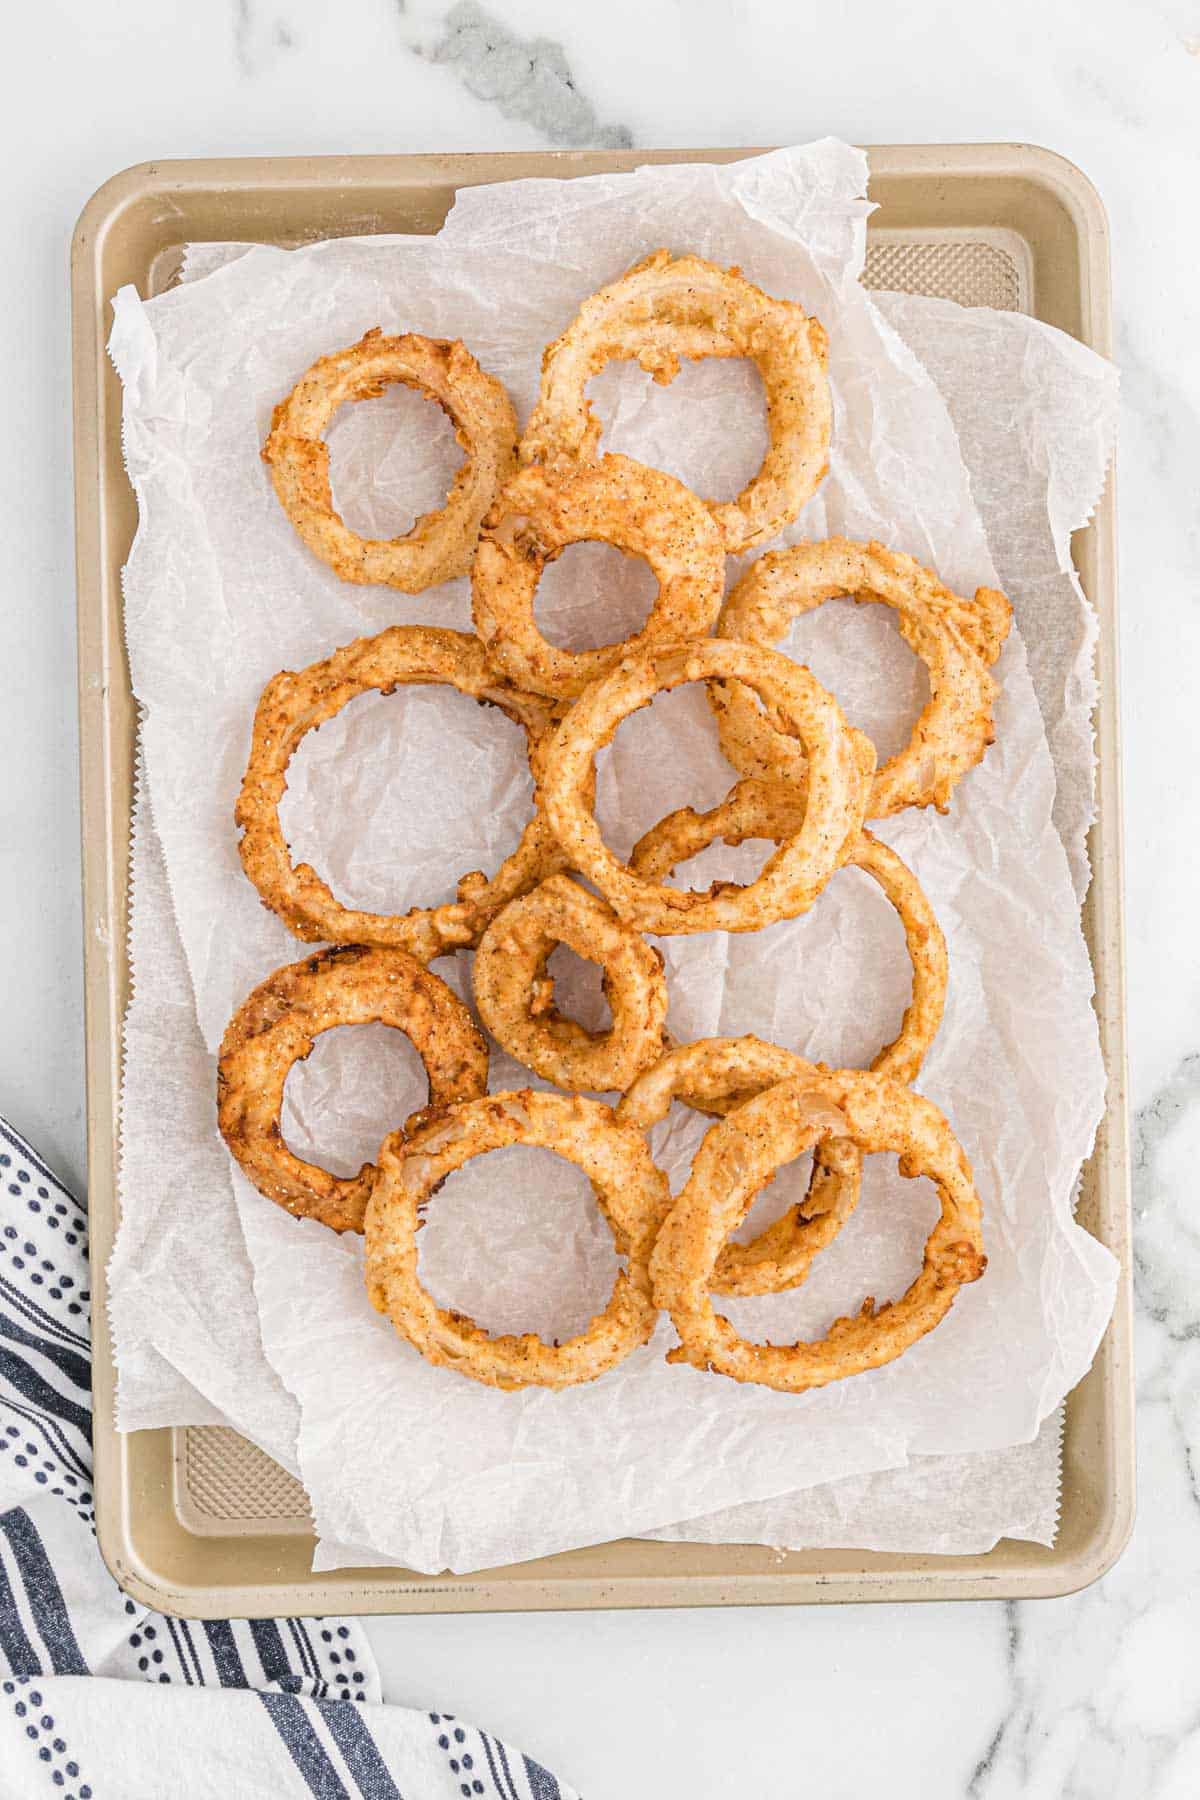 Fried onion rings on parchment and baking tray.